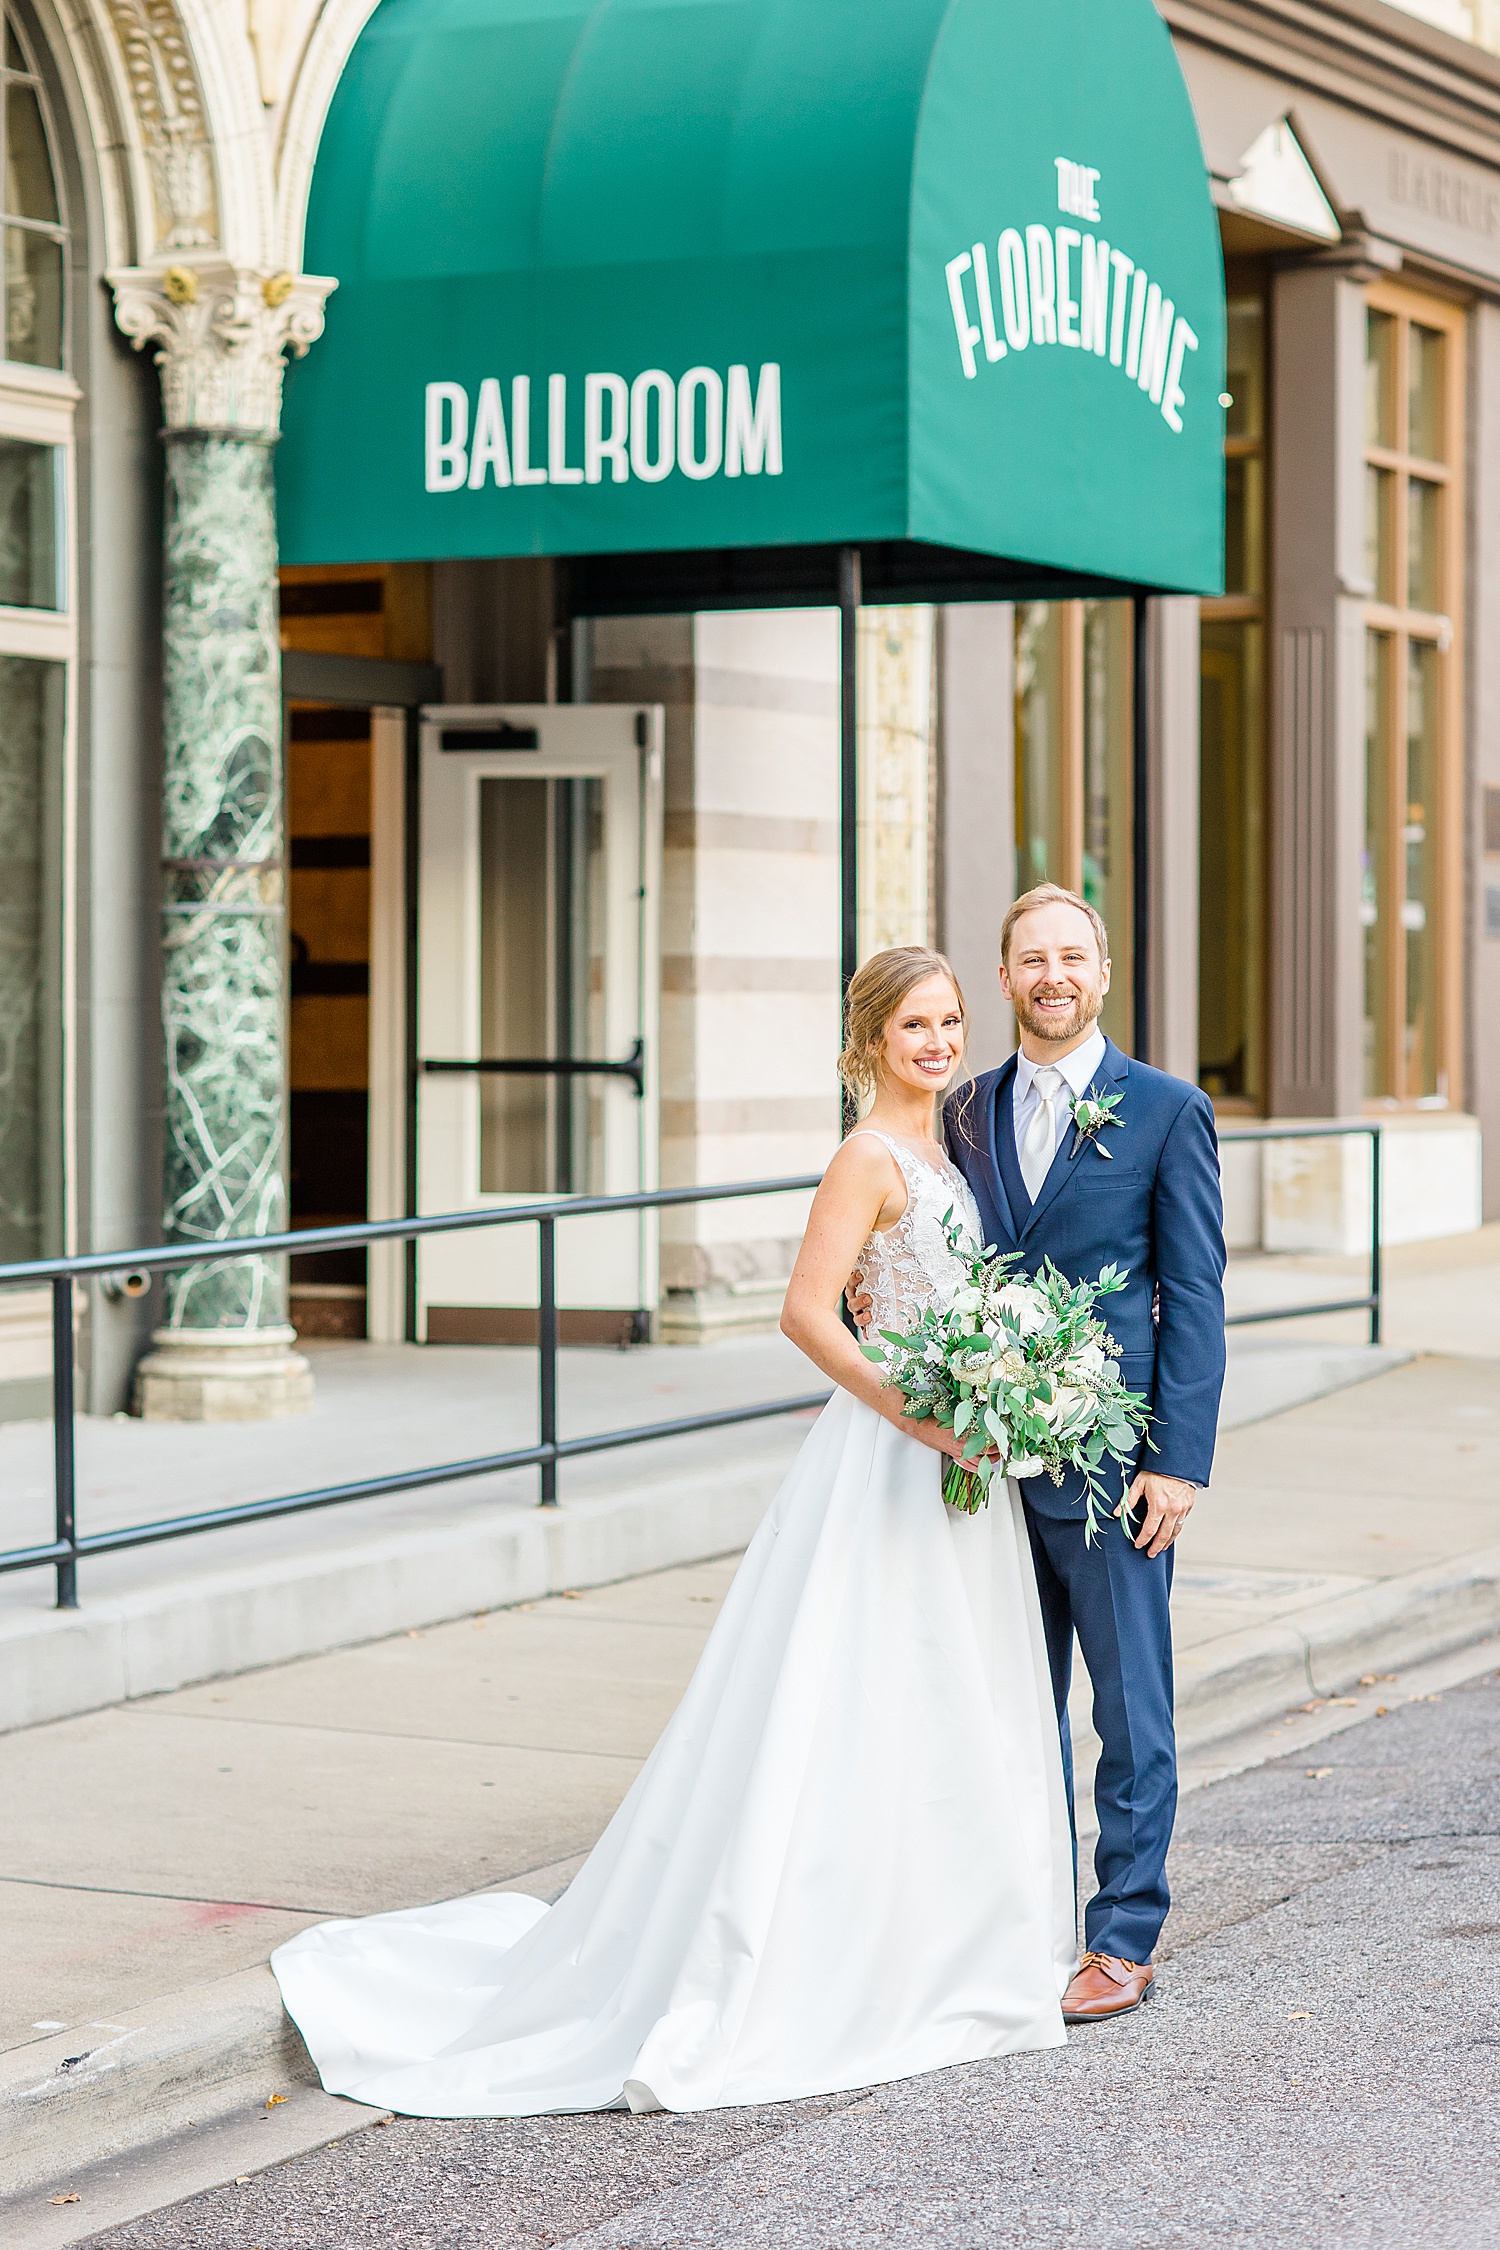 husband and wife standing outside The Florentine Building in Birmingham, AL